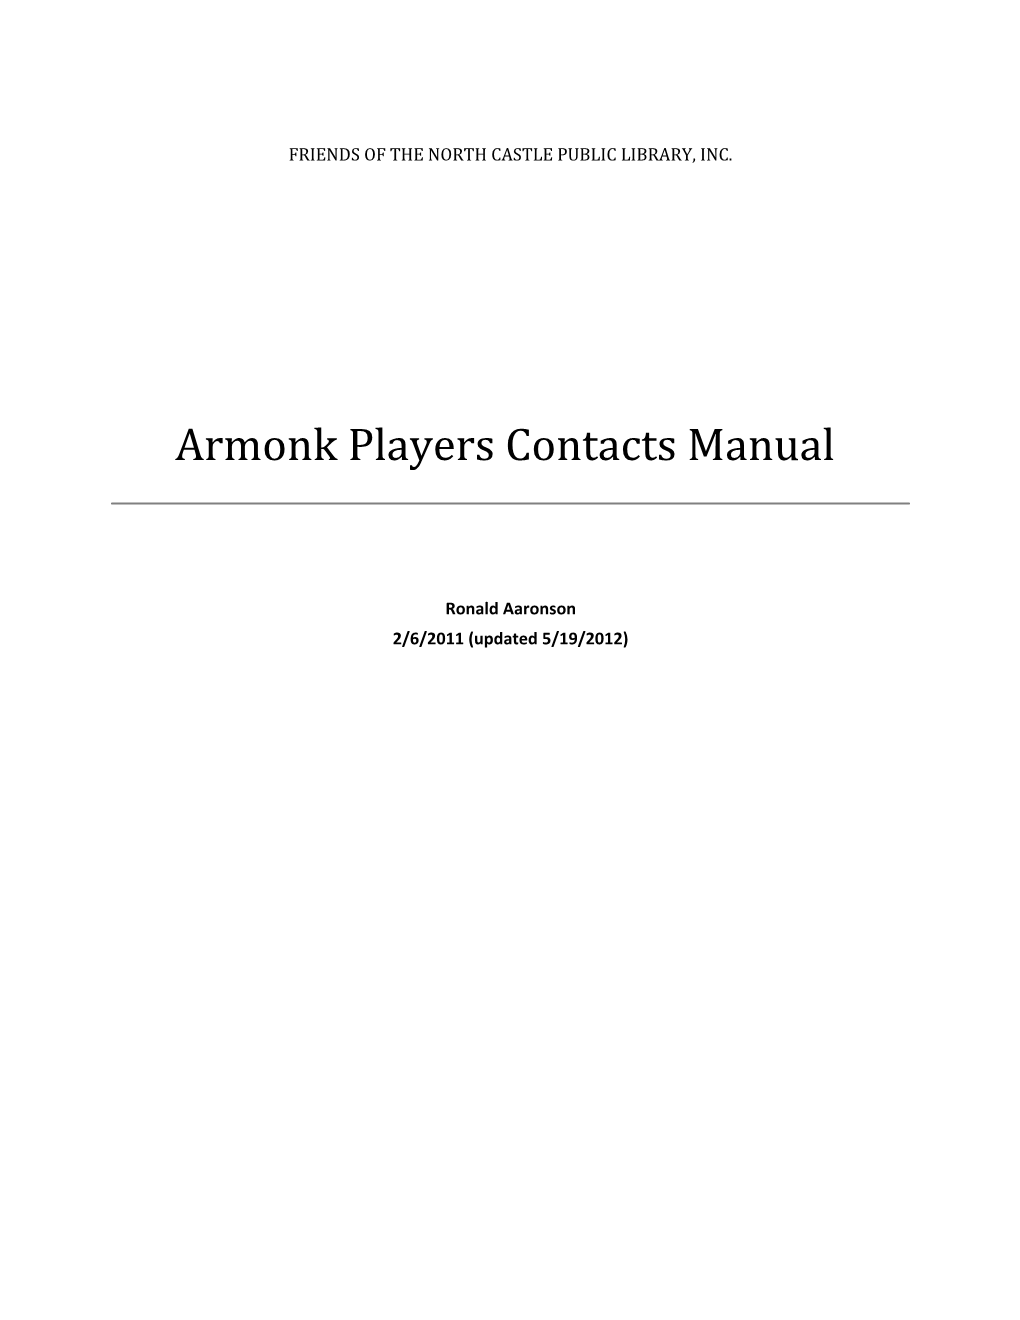 Armonk Players Contacts Manual